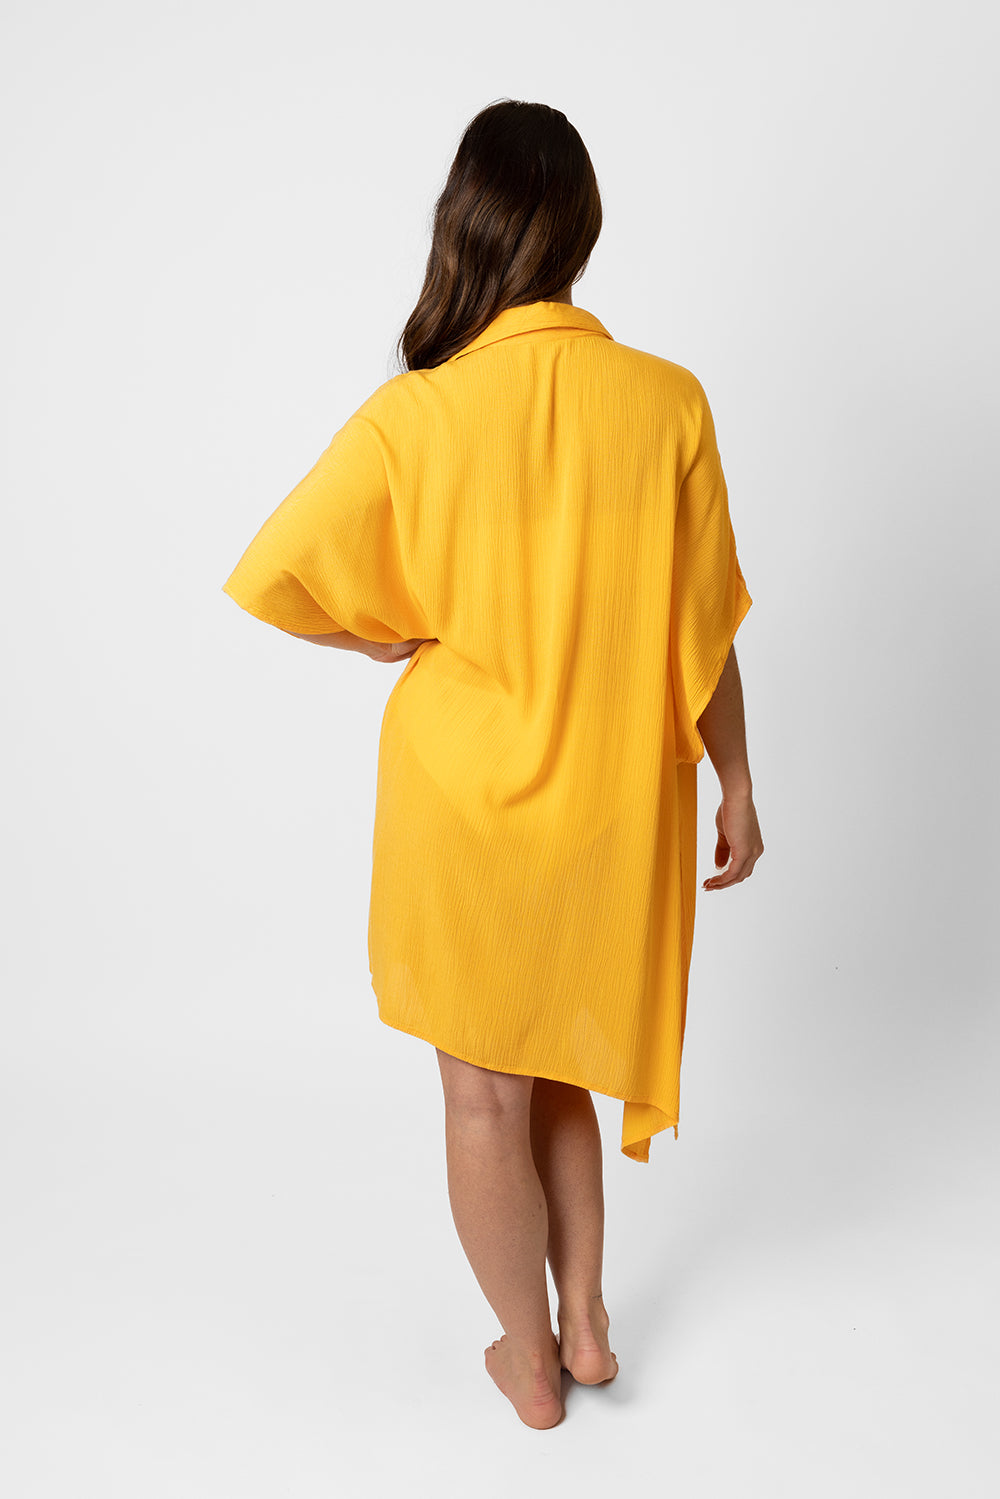 Koy resort miami big shirt dress in yellow mango color. Beach cover up and resort wear for women. 